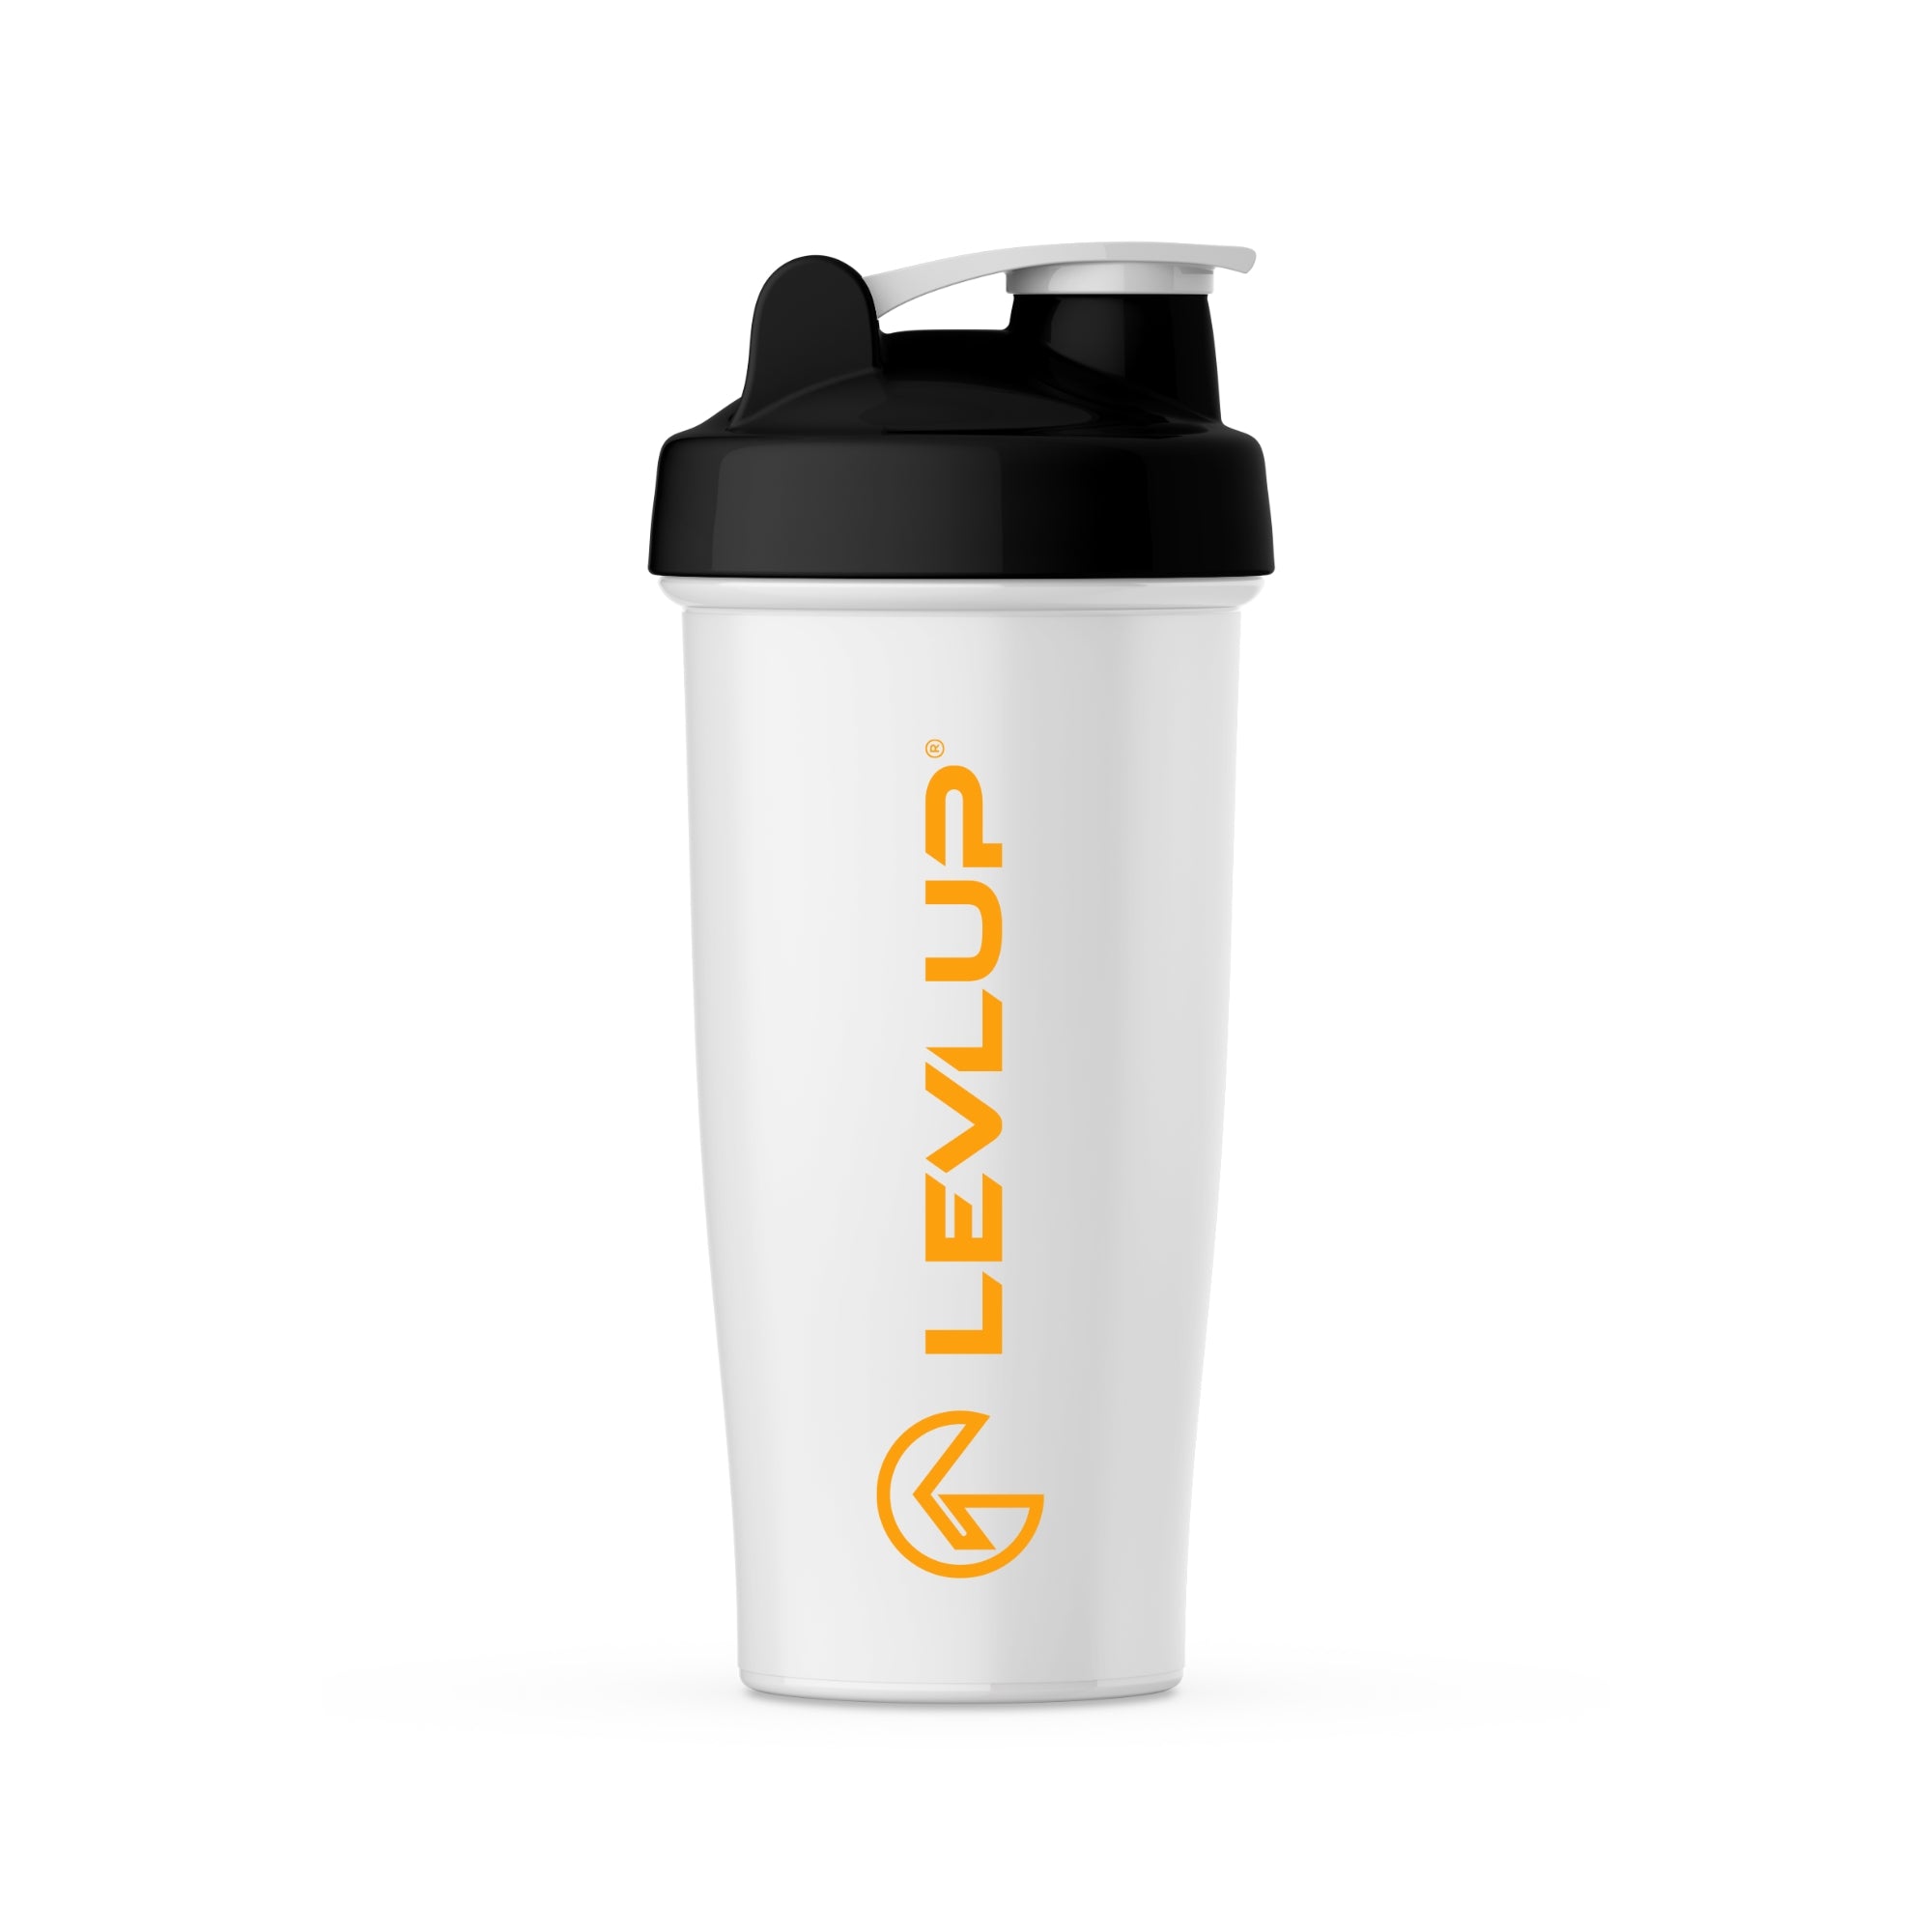 LevlUp Gaming Booster Shaker